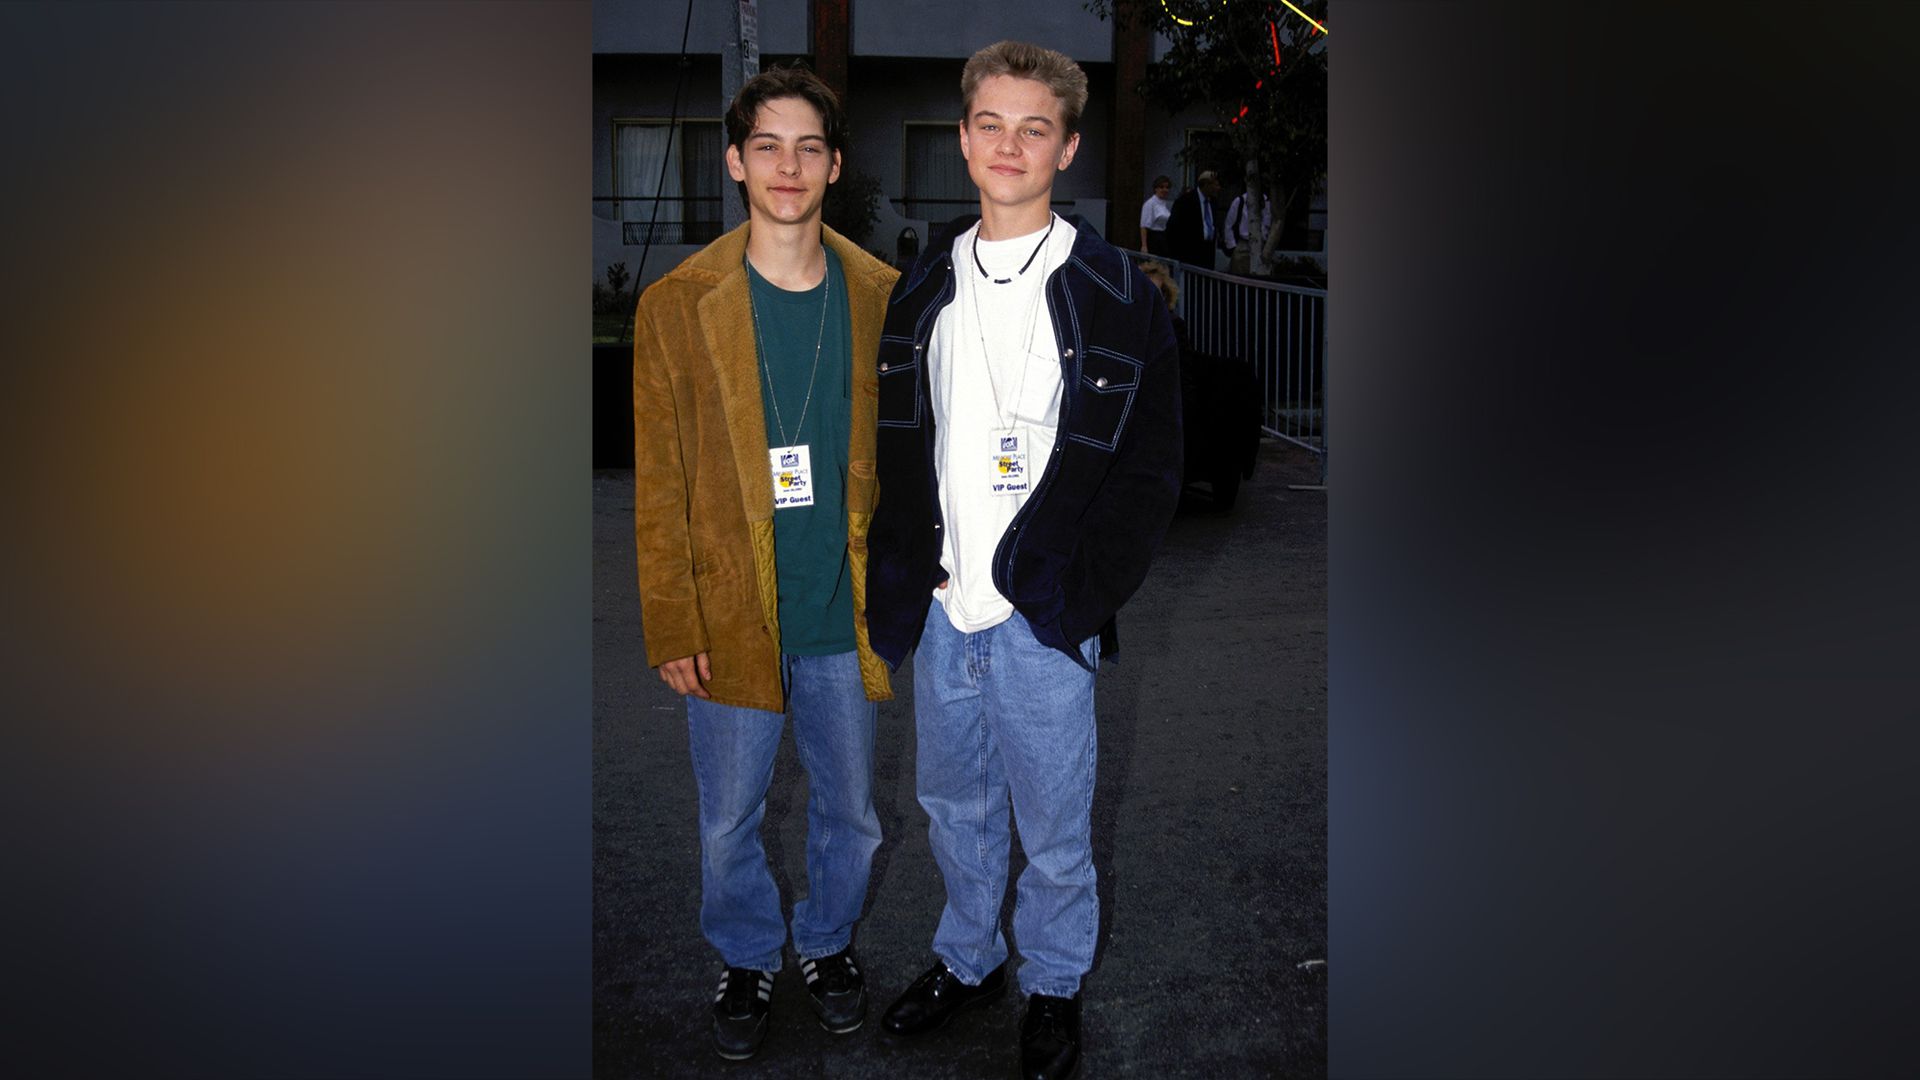 Tobey Maguire and Leonardo DiCaprio in their youth